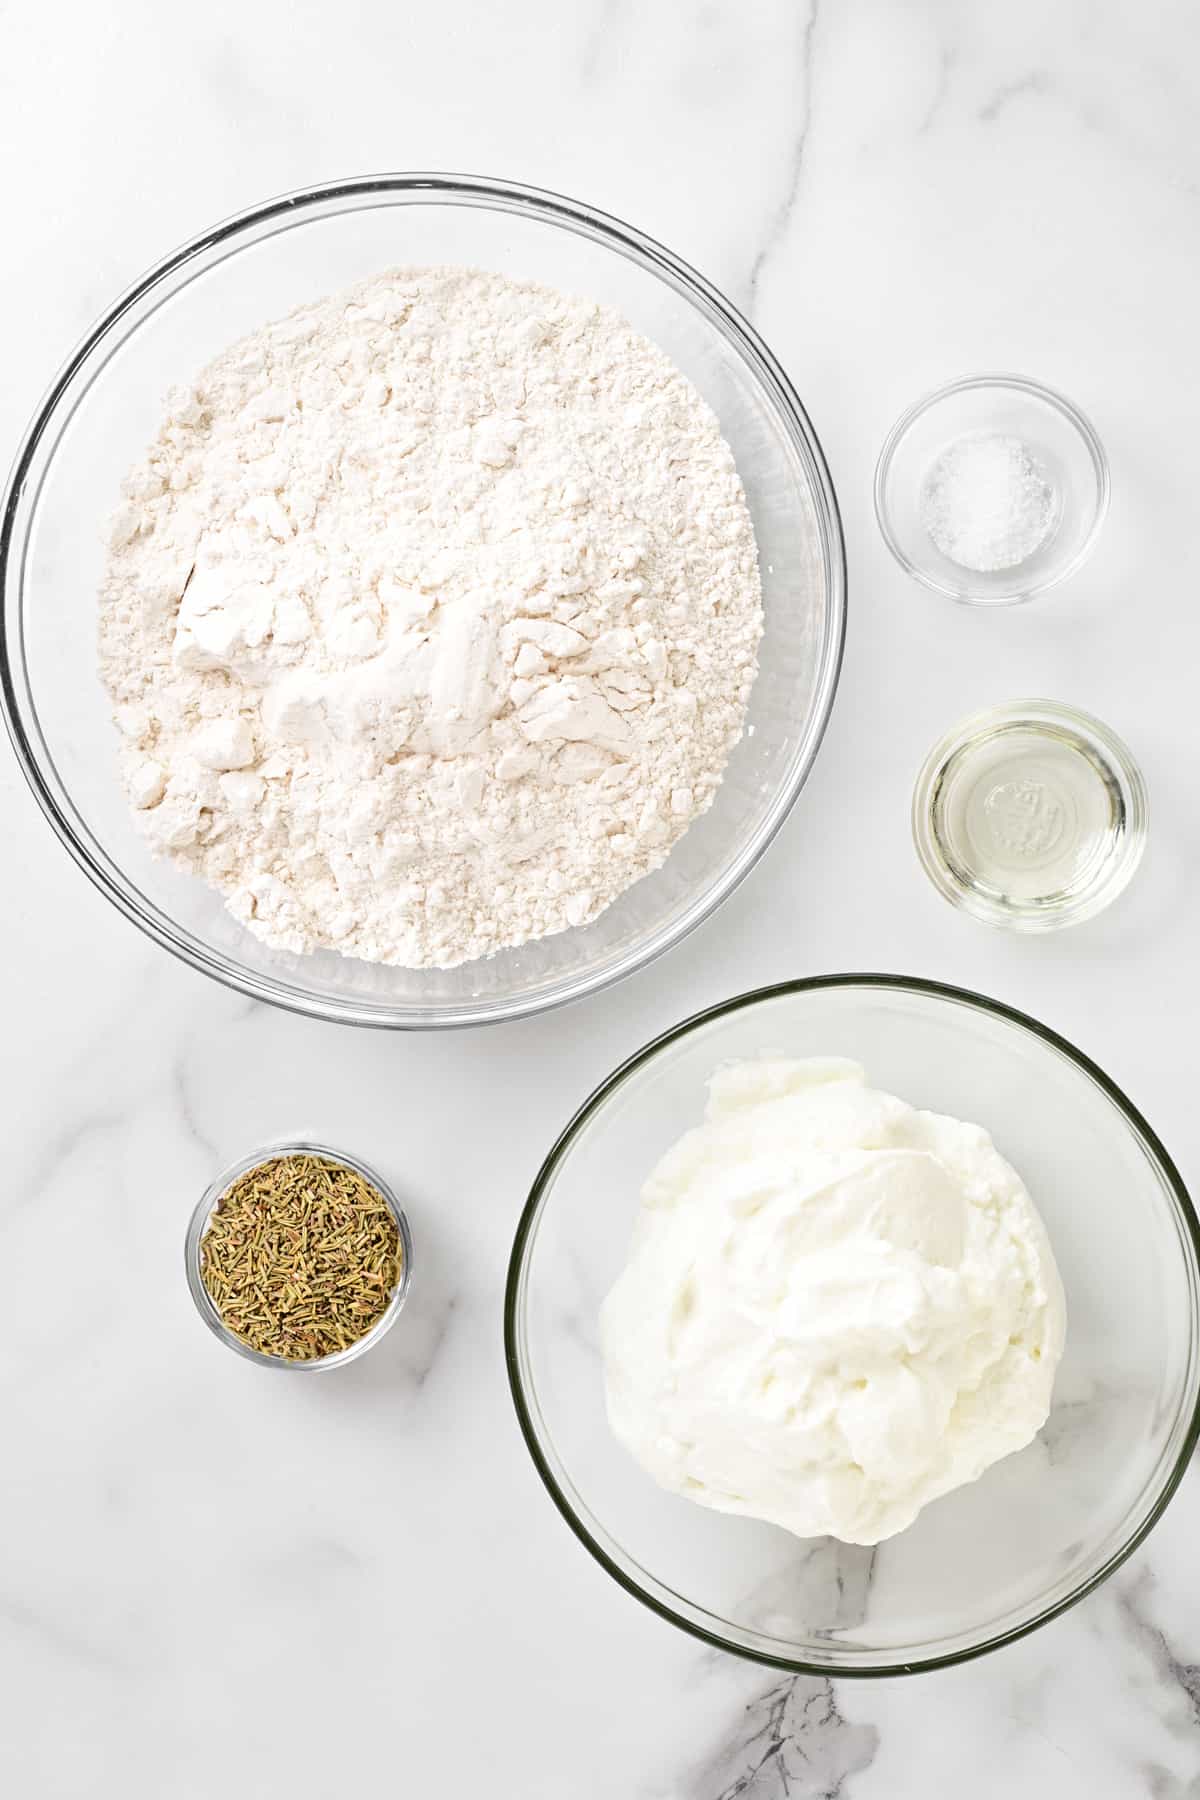 ingredients for making two-ingredient dough rosemary bread